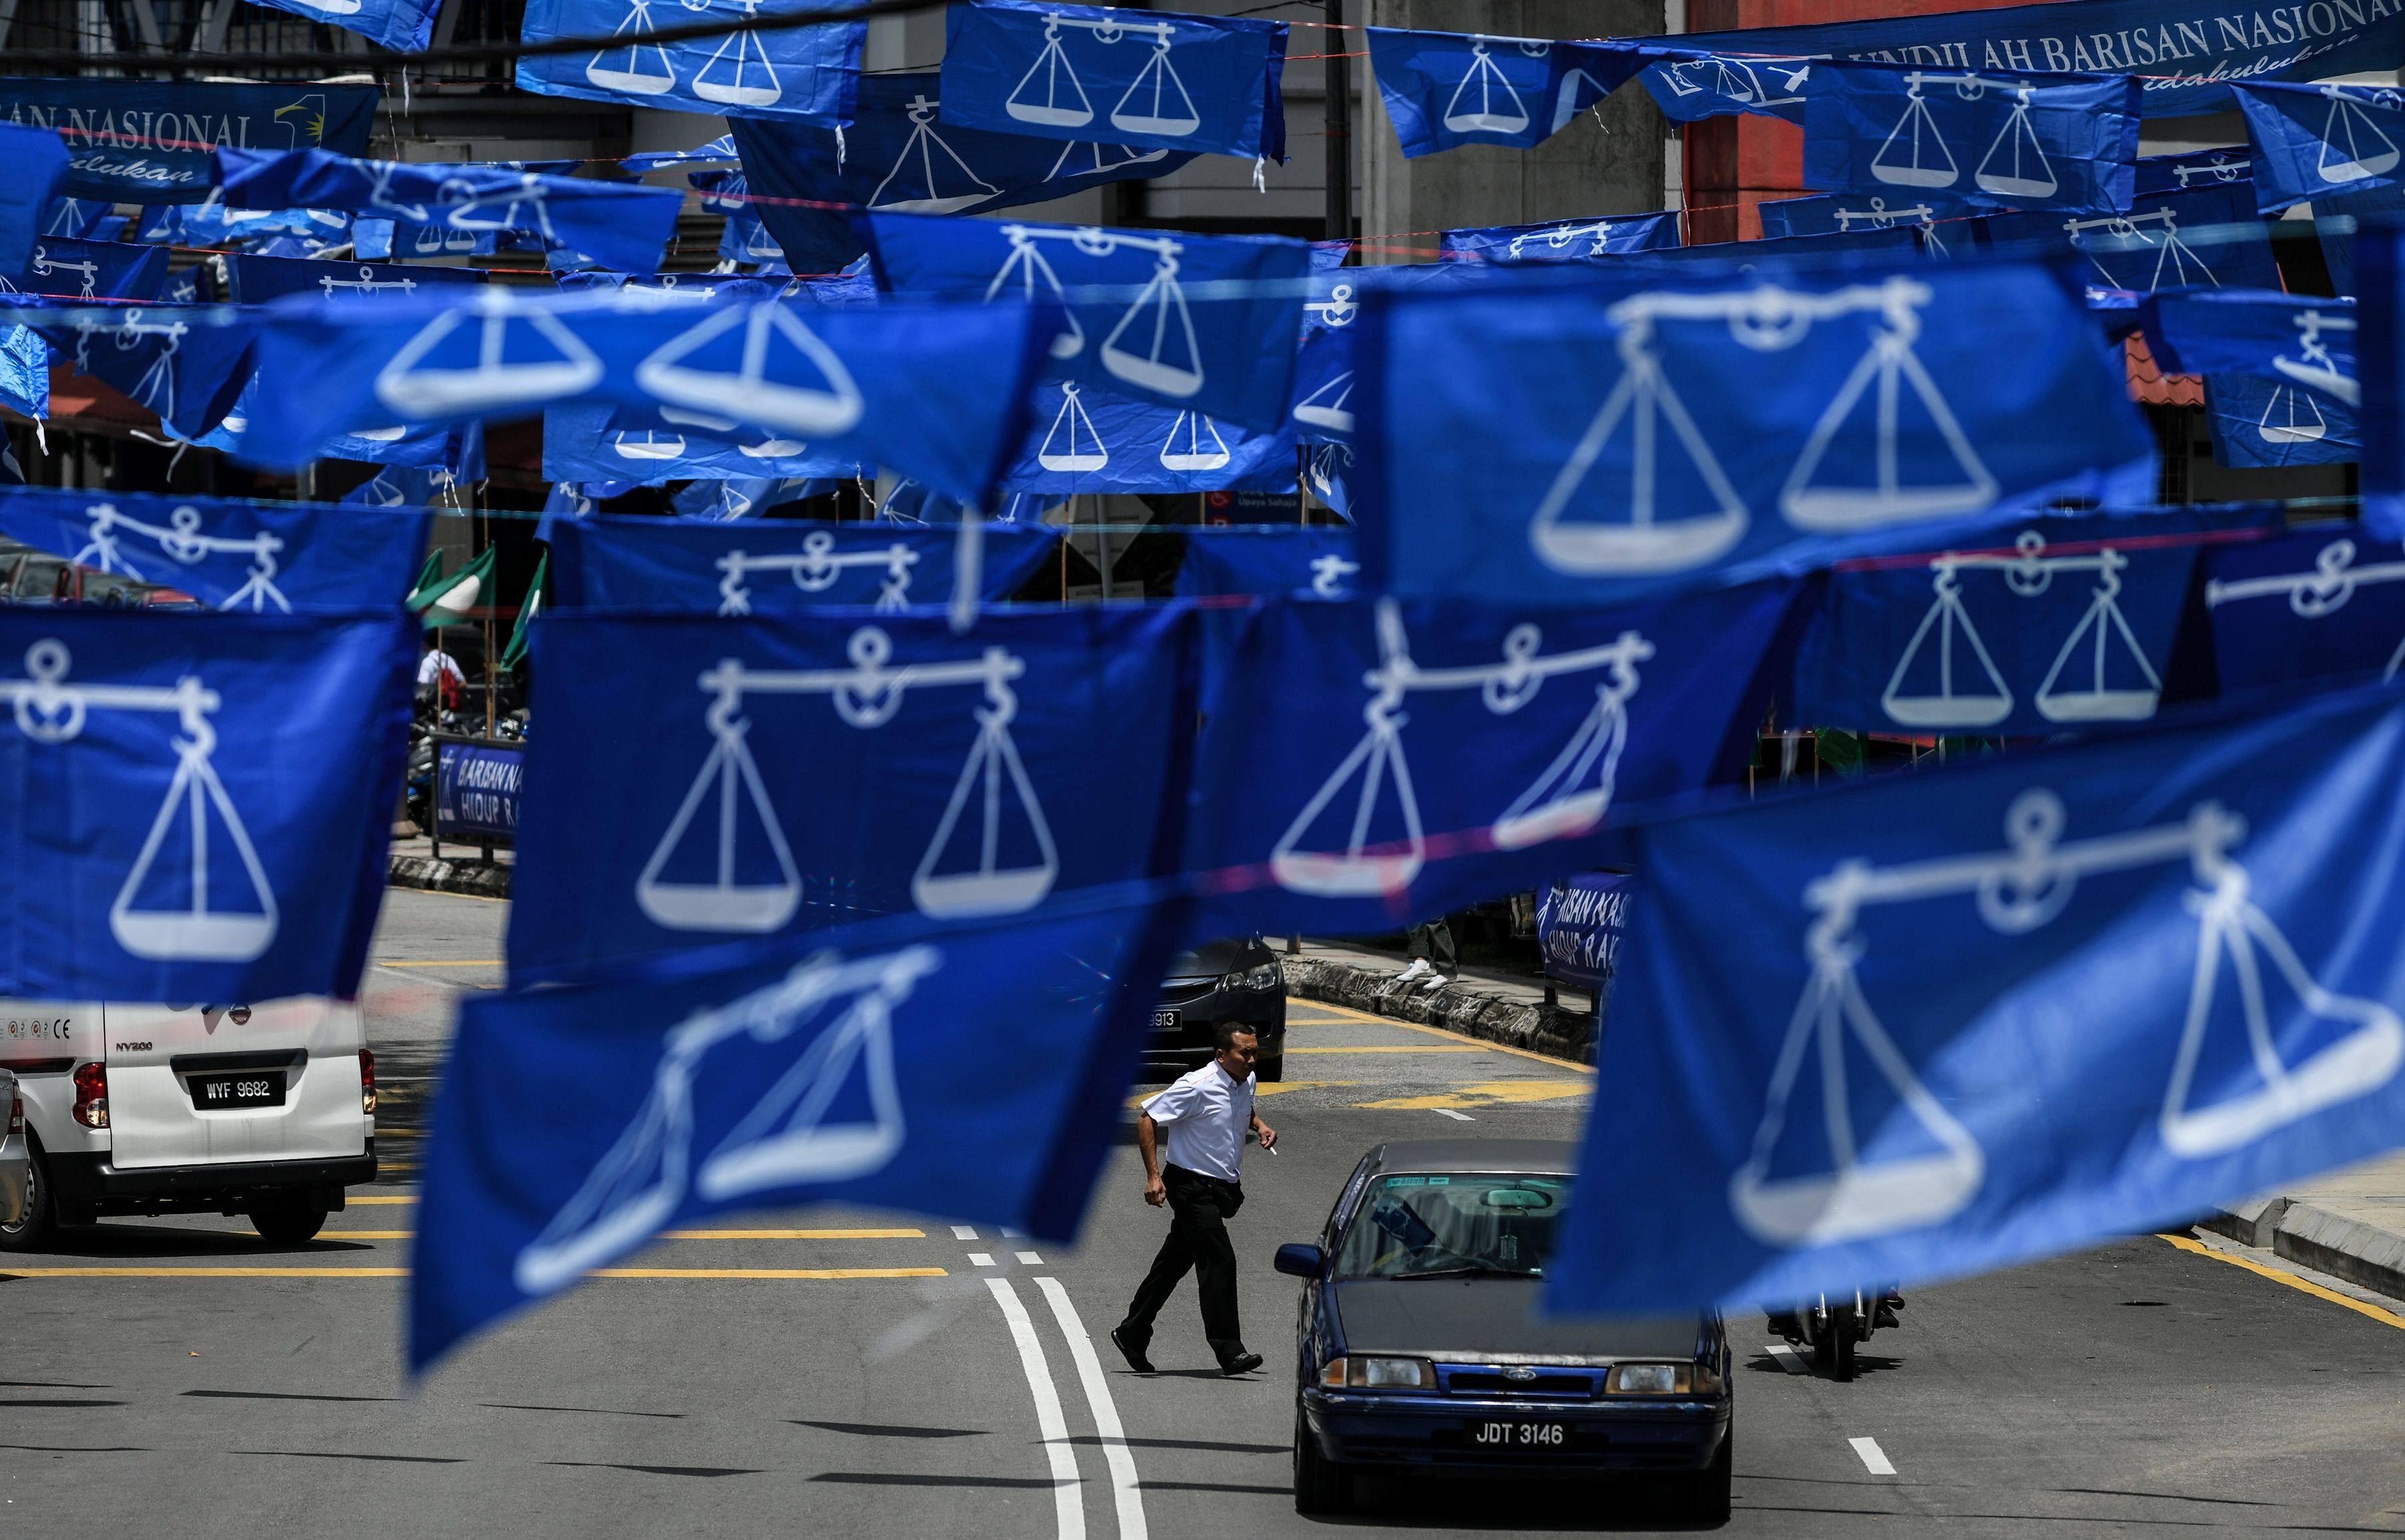 The 2018 election saw Barisan Nasional’s first defeat since Malaysia’s independence to the reformist Pakatan Harapan alliance. File photo: AFP